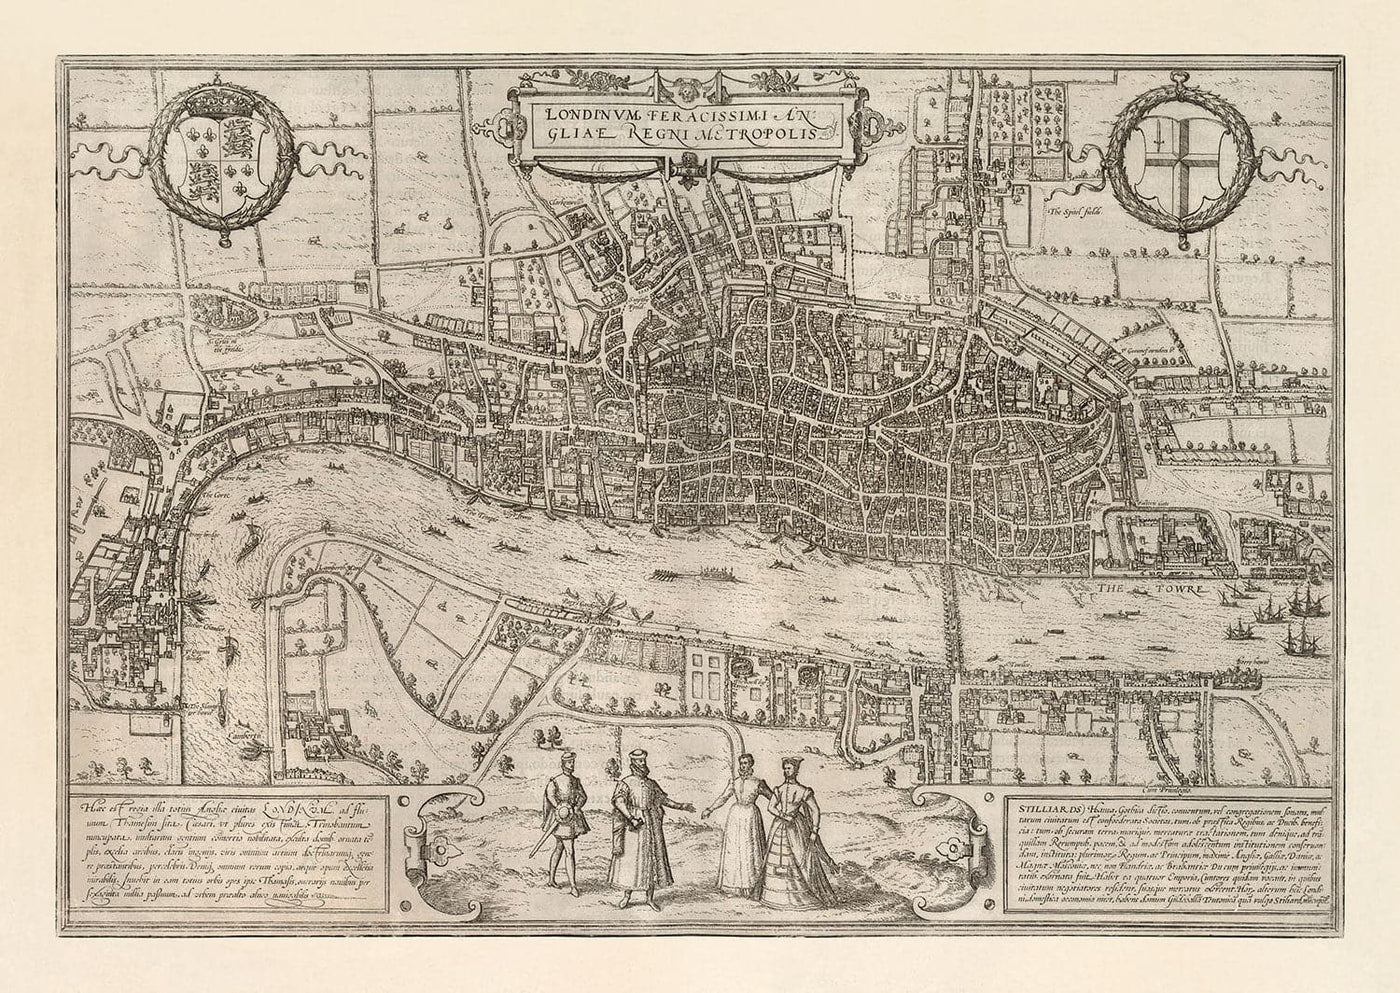 Very Old Map of London, 1572 by Georg Braun - City of London, Westminster, Southwark